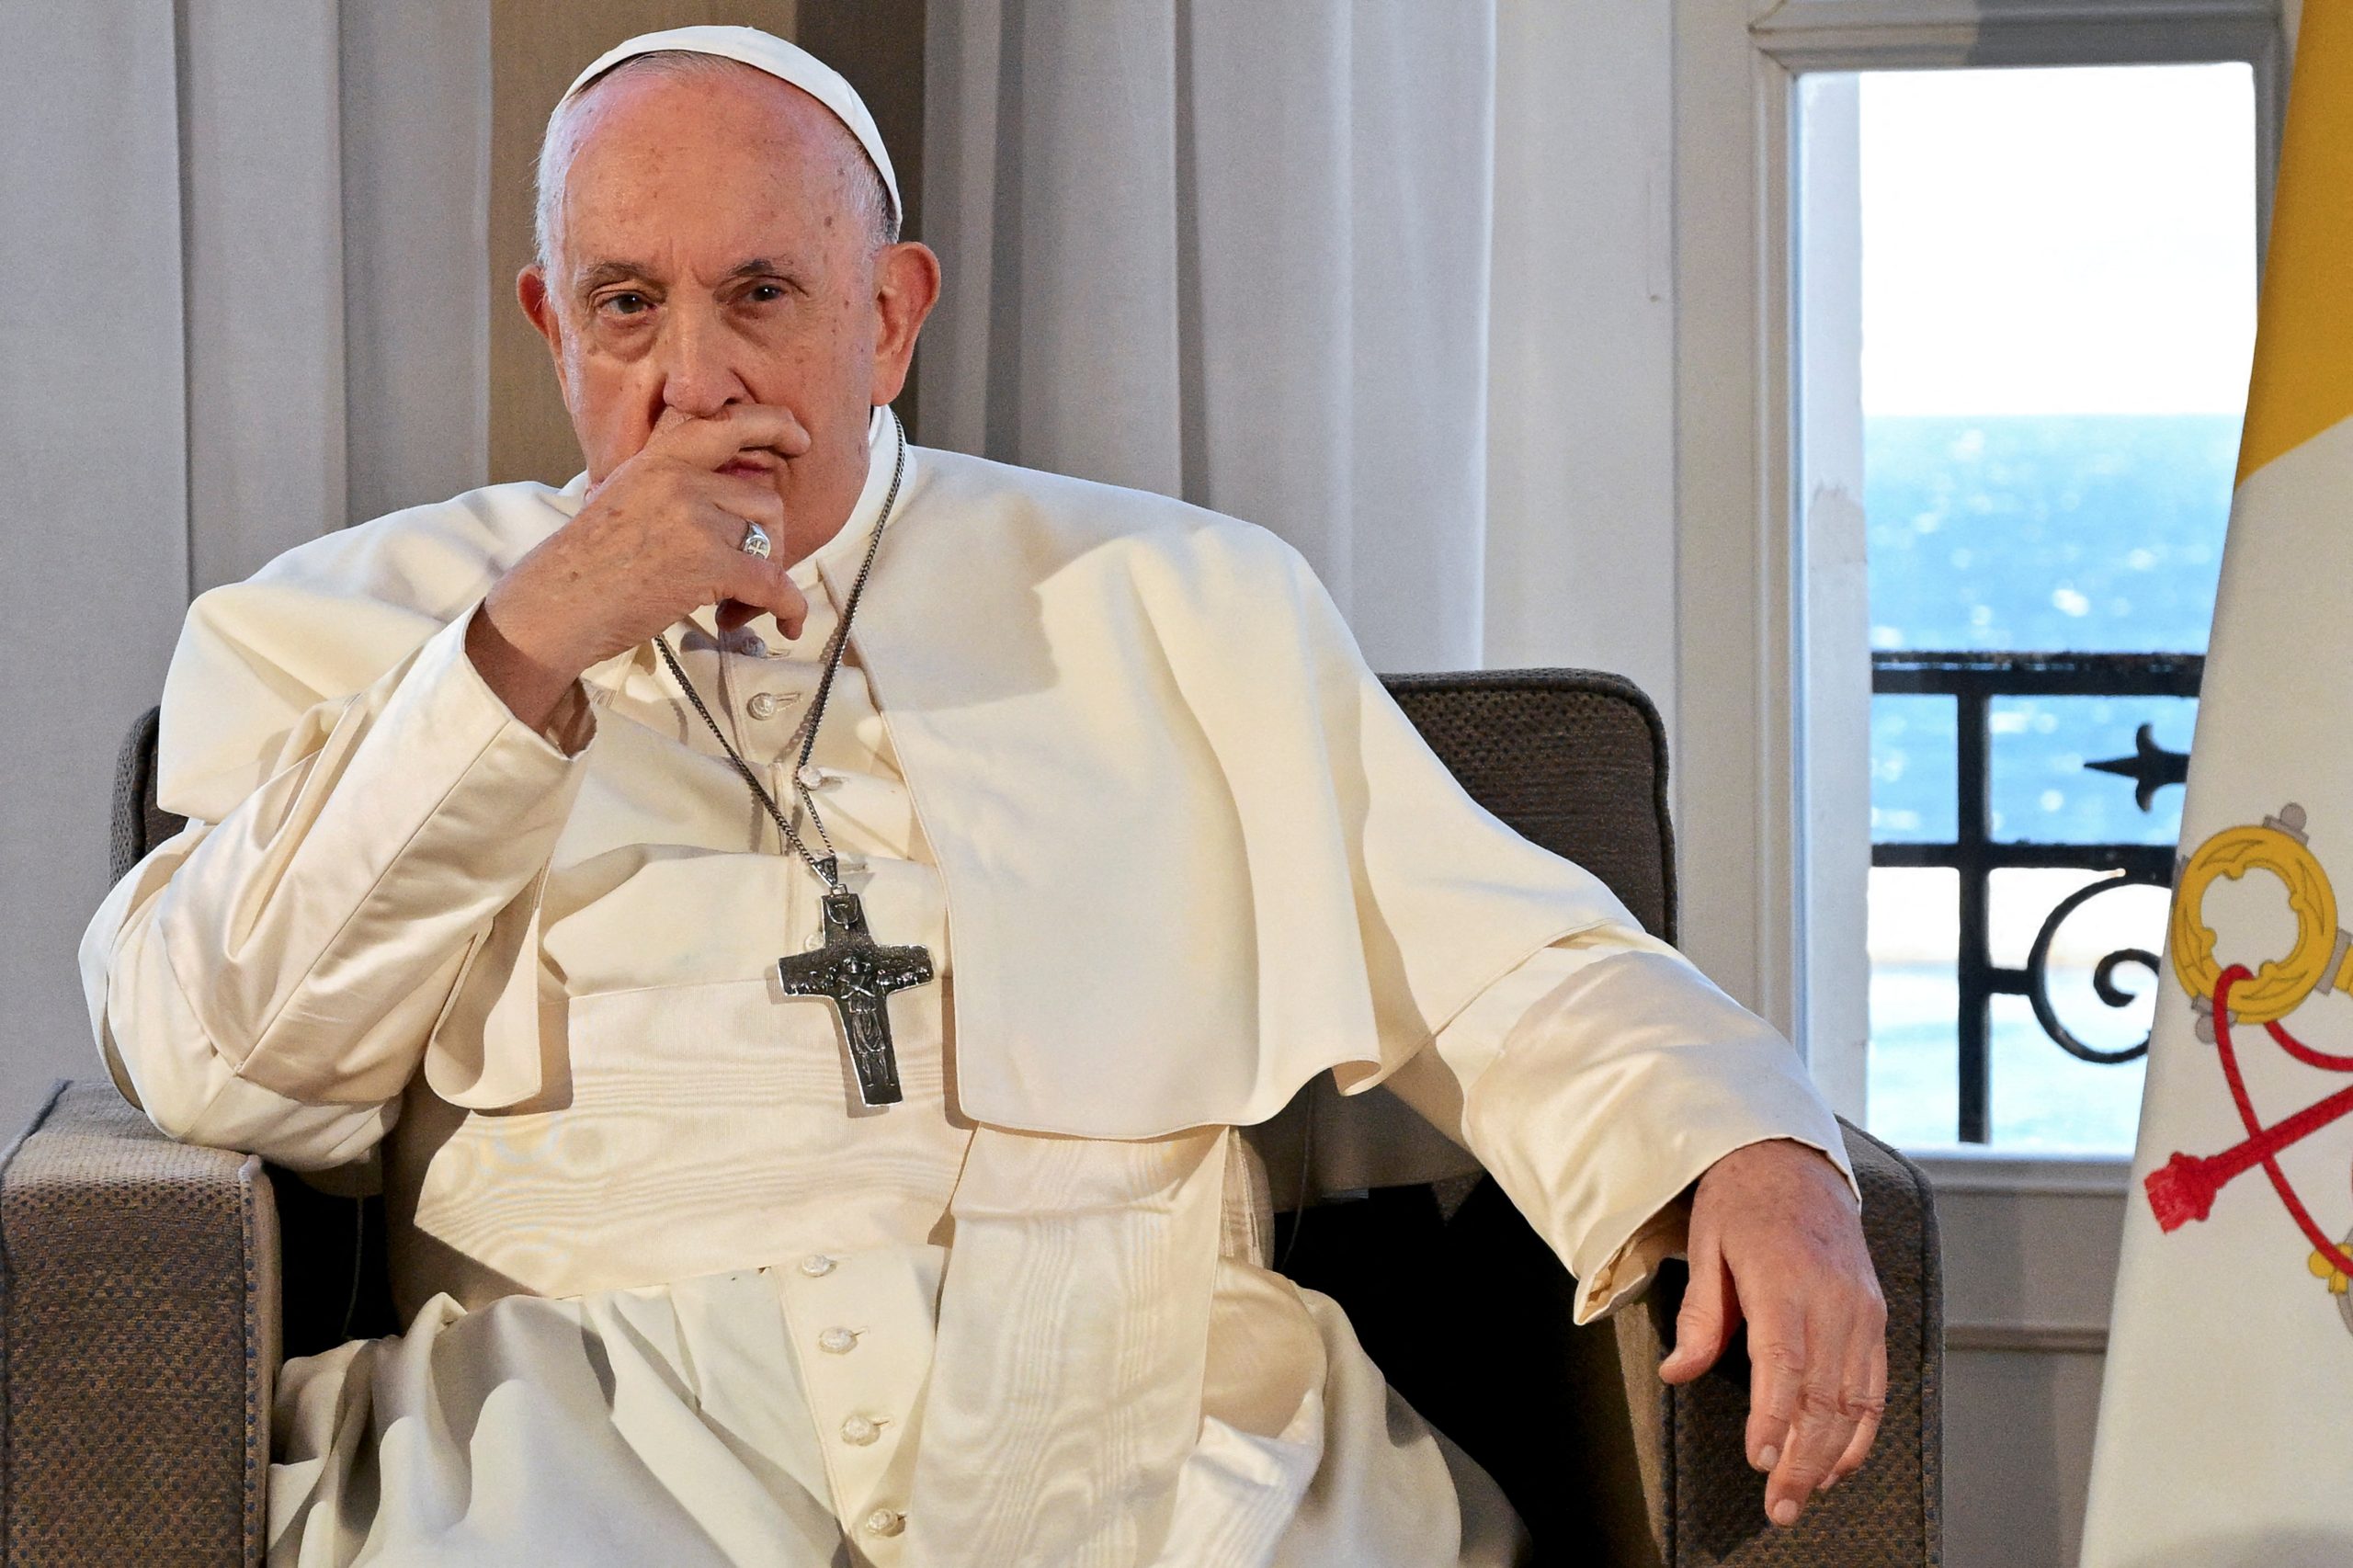 Pope Francis Predicts a Calmer Response Over Same-Sex Blessings